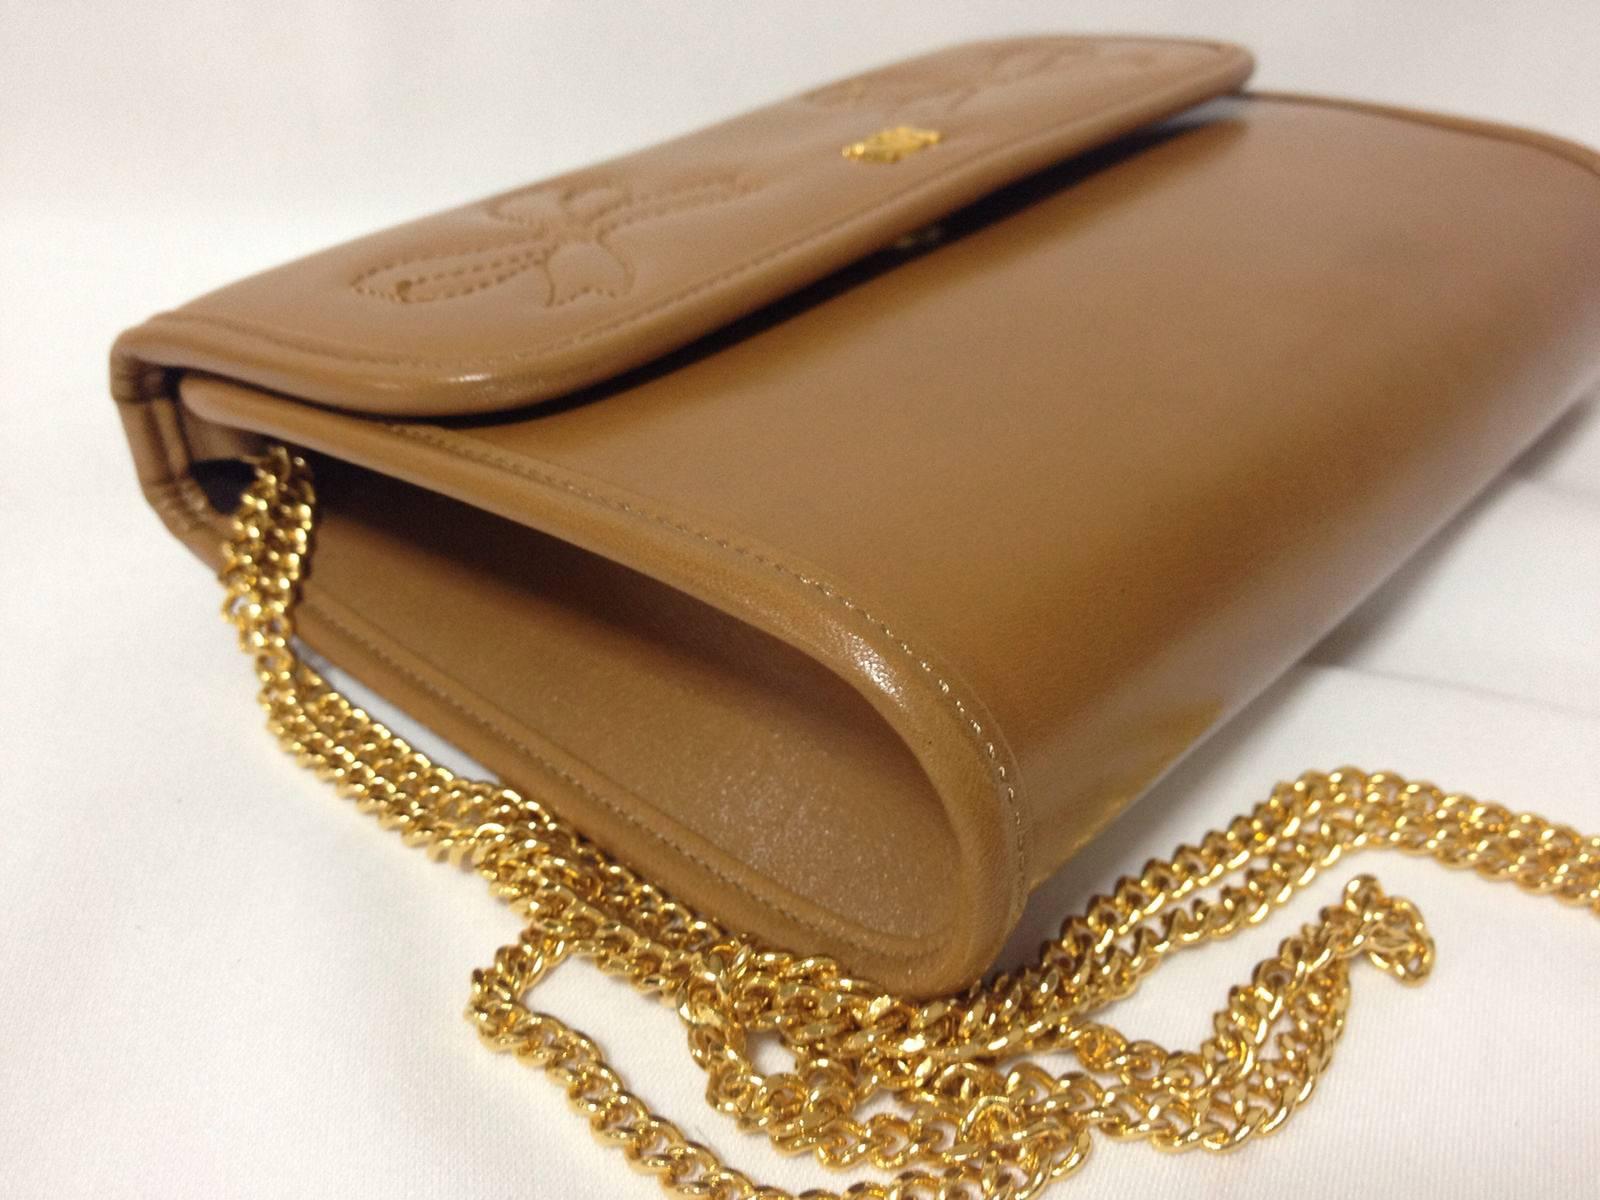 Vintage Nina Ricci tanned brown leather mini clutch shoulder bag with gold chain For Sale 1